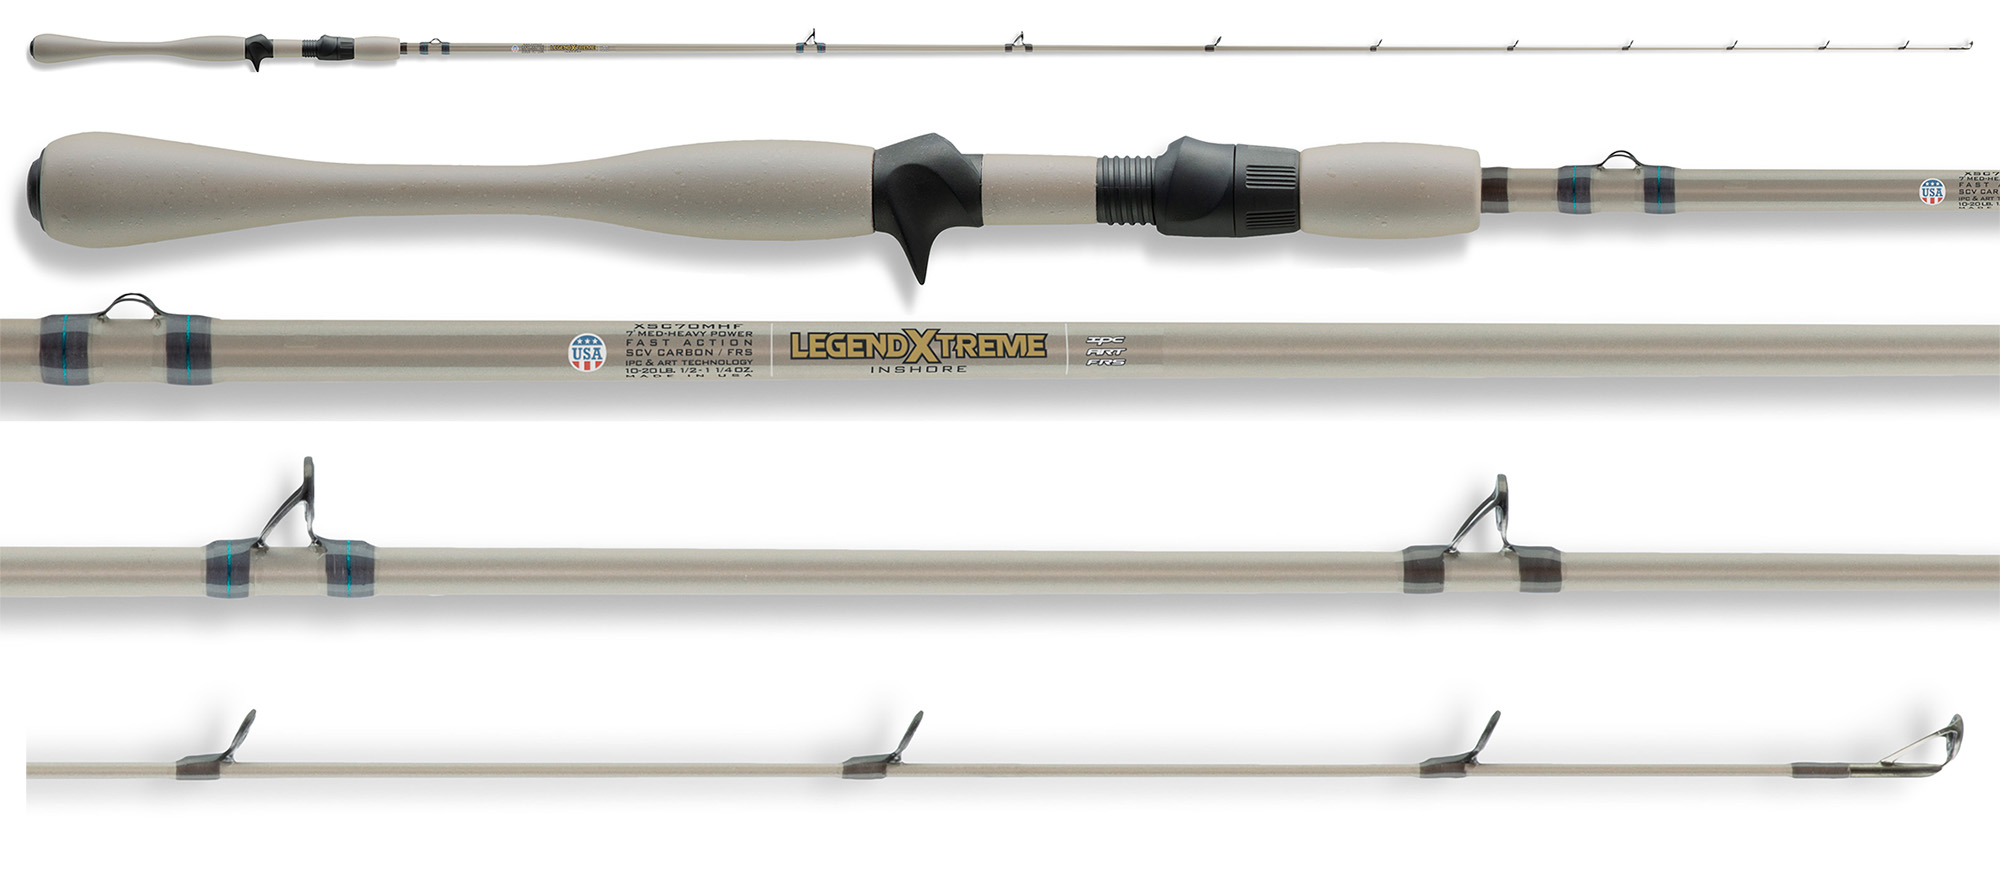 St. Croix Legend Xtreme Inshore Spinning and Casting Rods